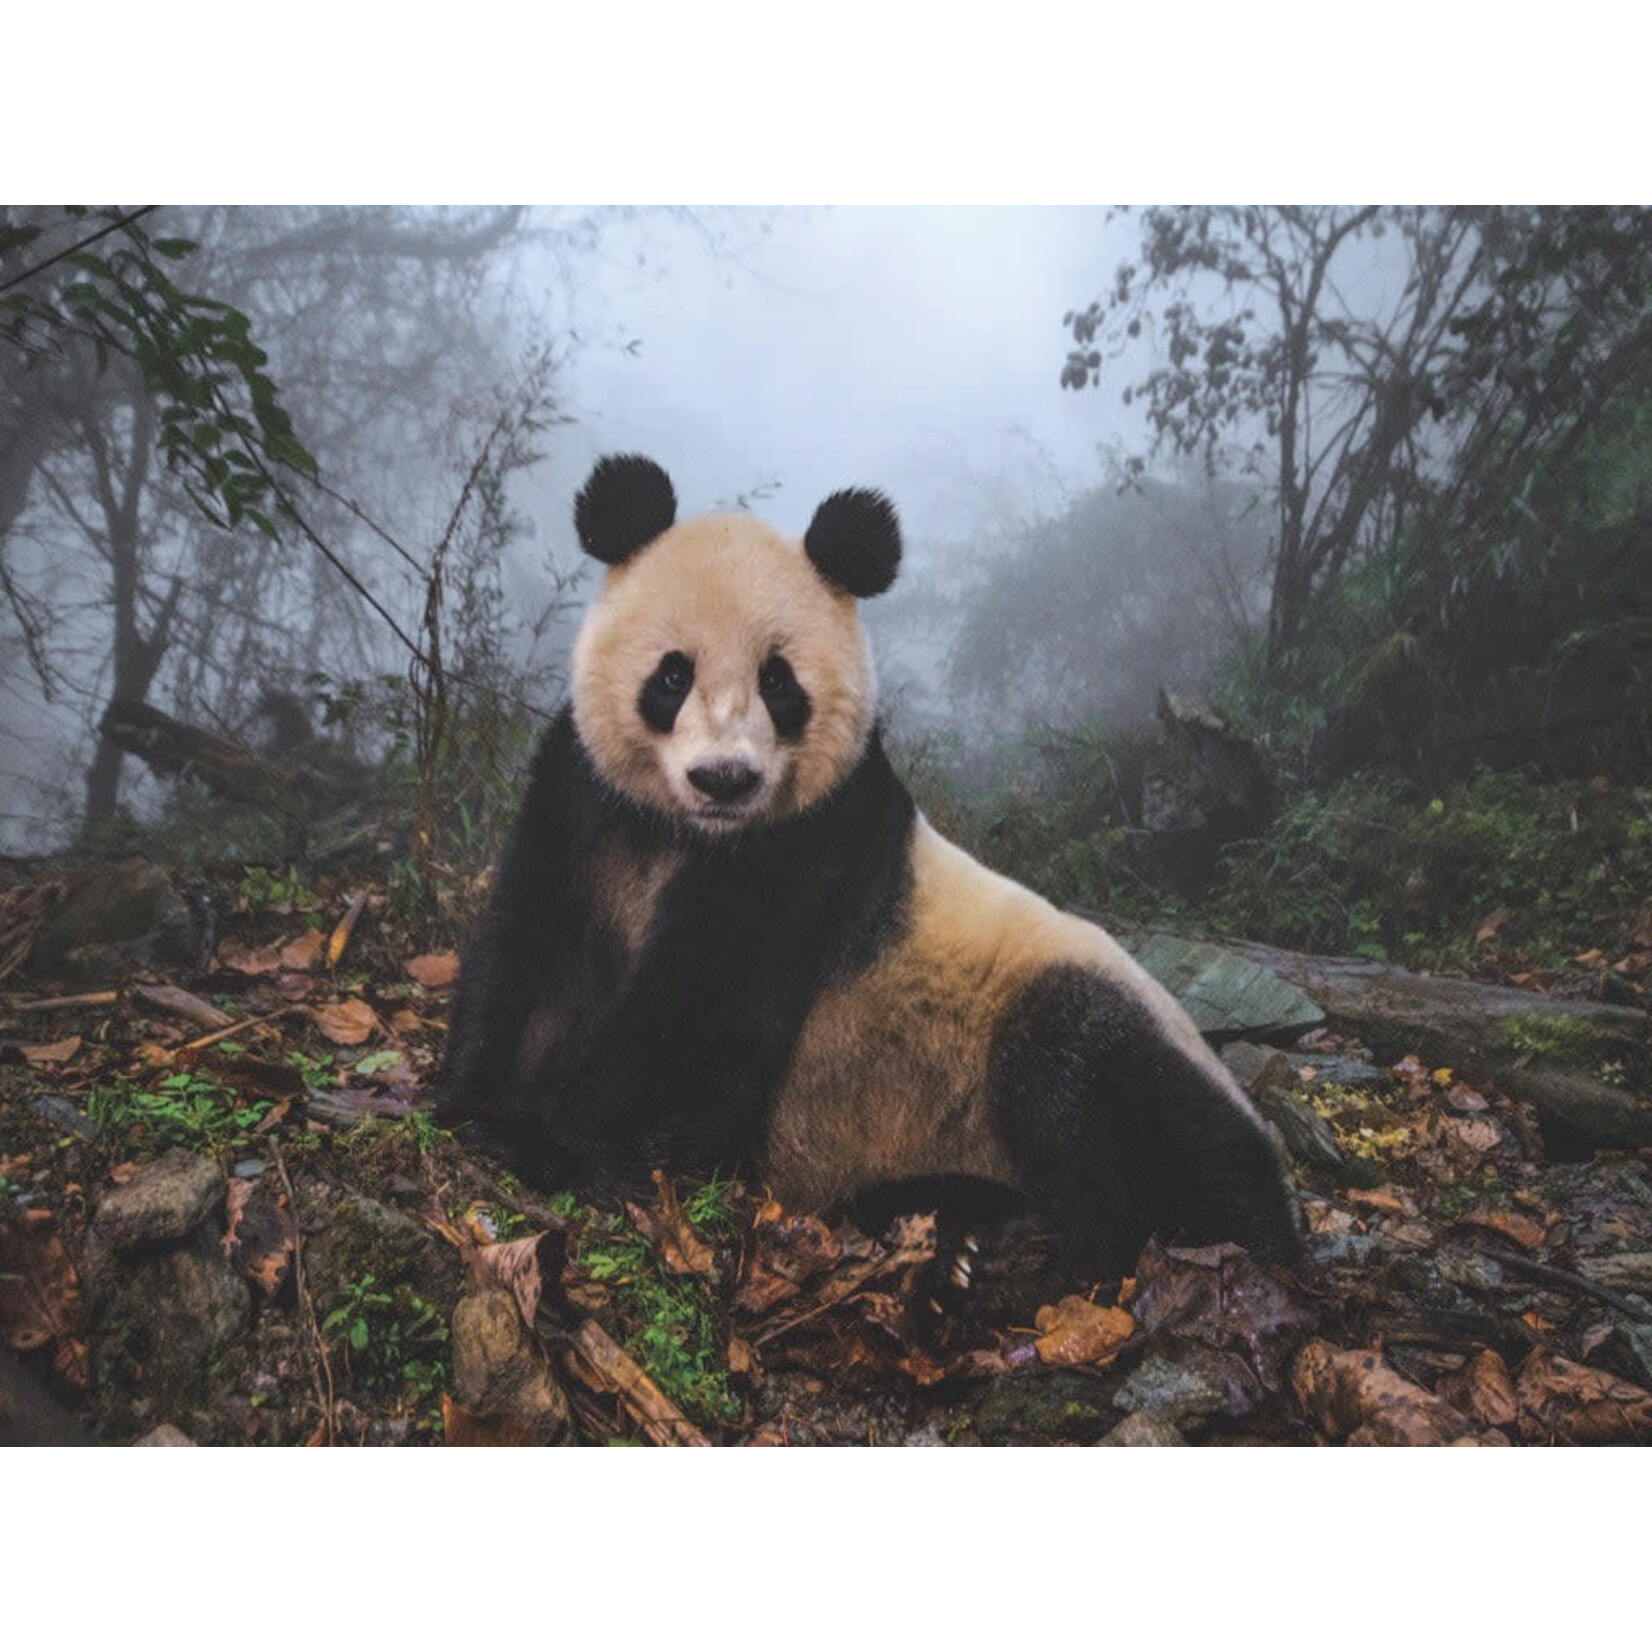 New York Puzzle Co National Geographic - Giant Panda 1000 Piece Puzzle